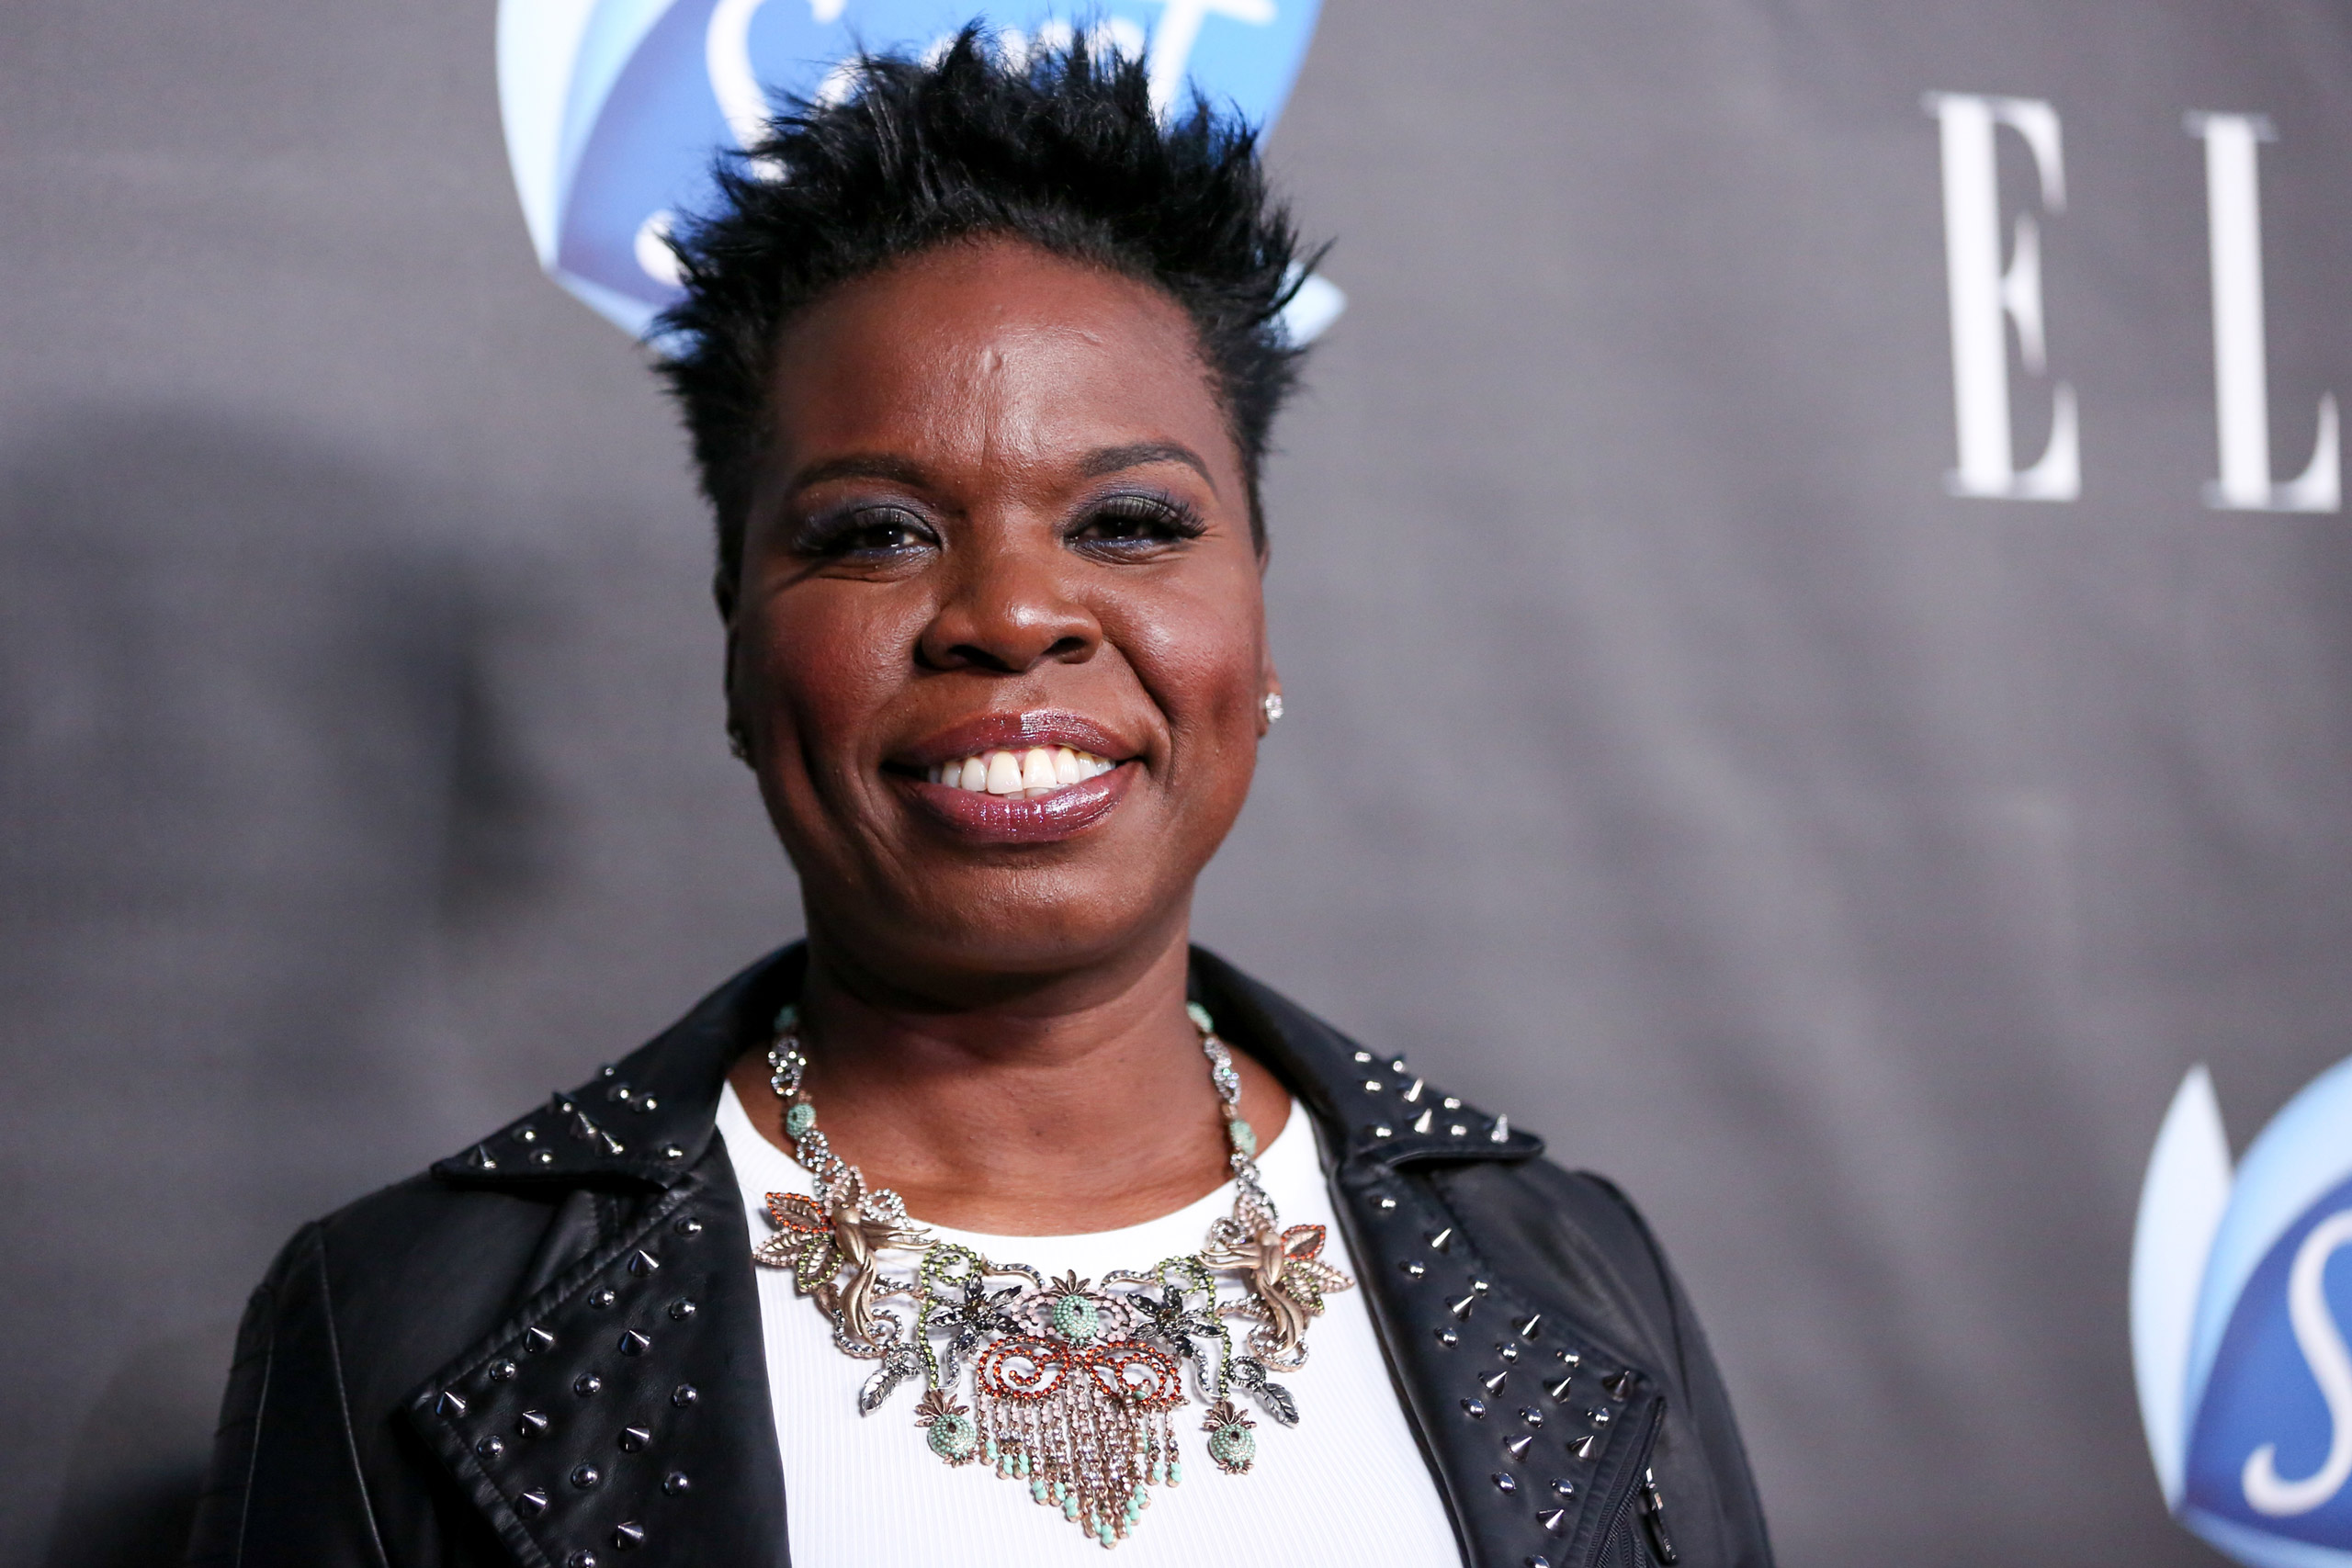 Leslie Jones arrives at the ELLE Women in Comedy Event at Hyde Sunset in Los Angeles on June 7, 2016. (Rich Fury—Invision/AP)